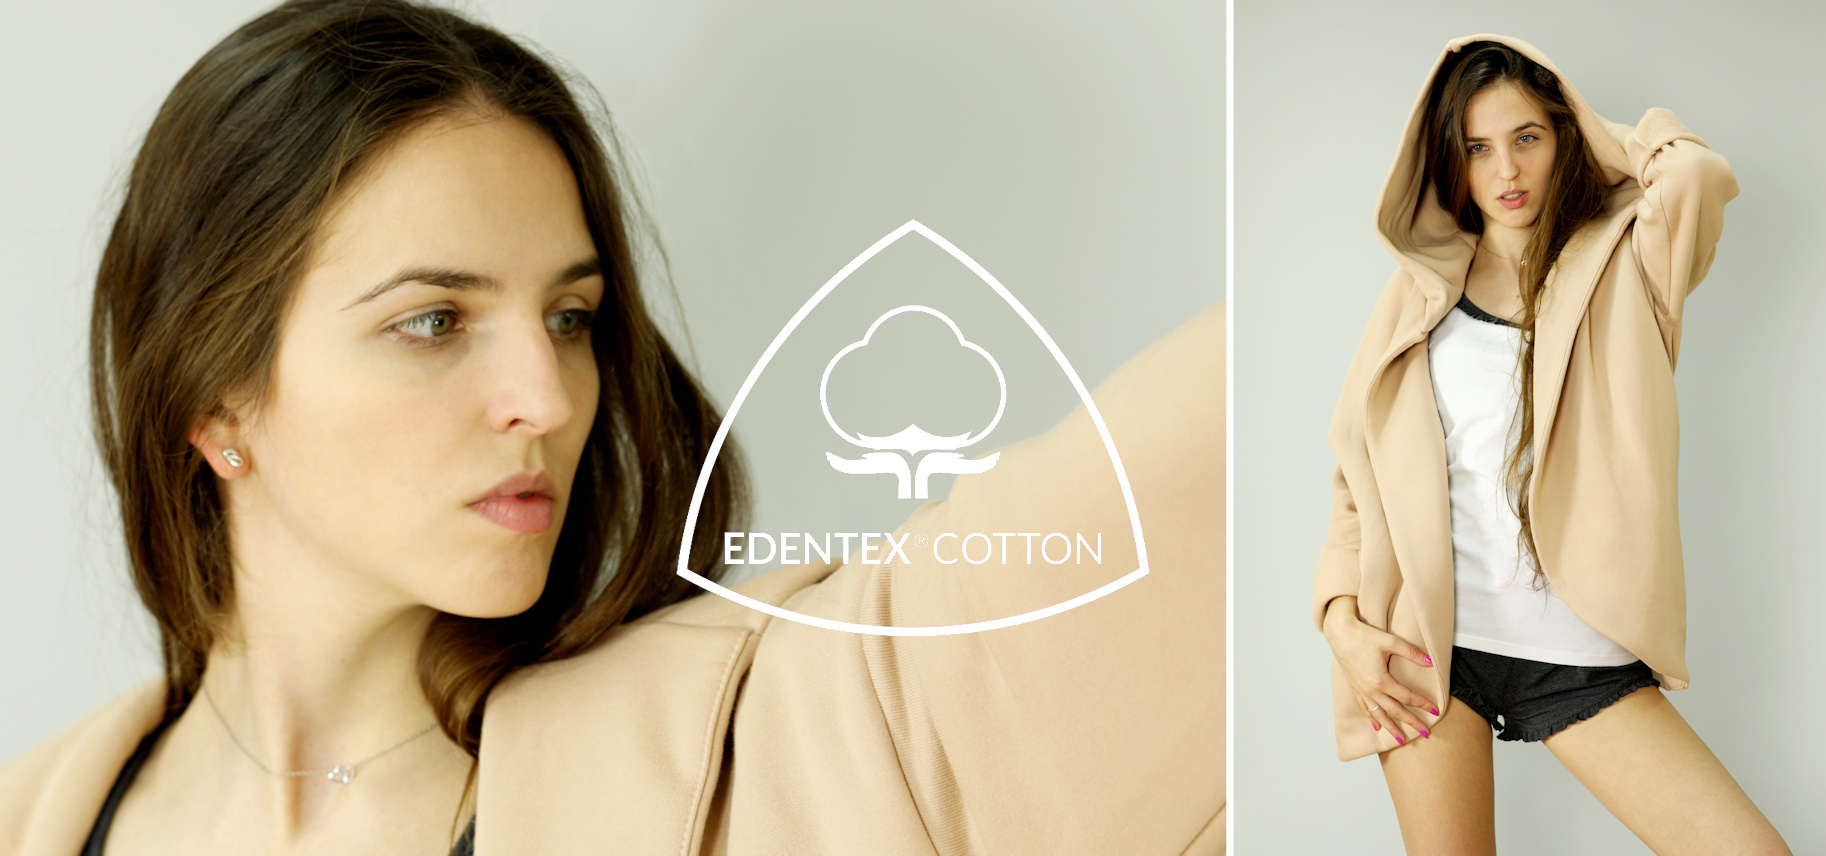 EDENTEX® is the value in every detail. Timeless beauty, love and elegance, softness and strength in one.